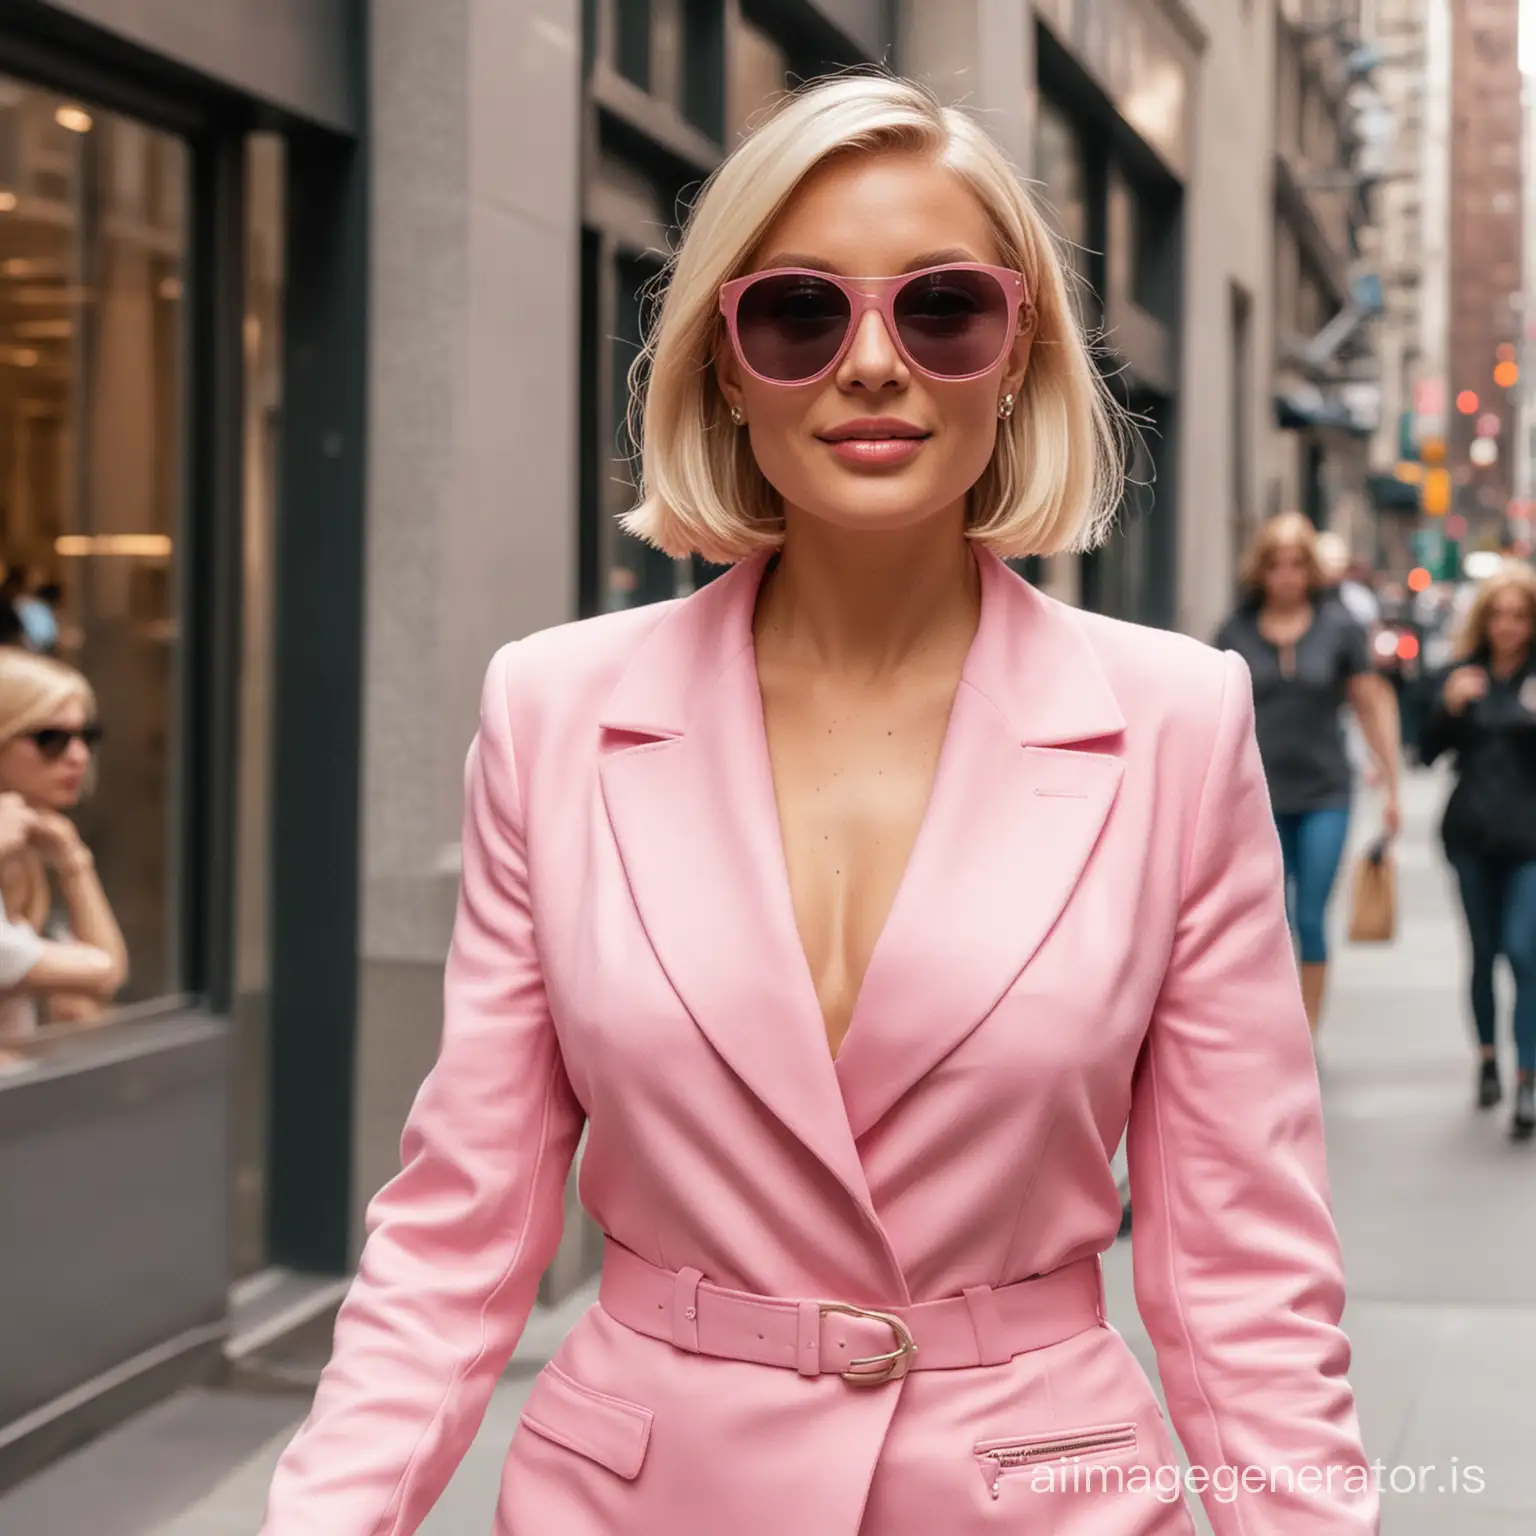 famous blonde woman with a bob cut wearing pink stepping out the office being photographed by paparazzi  in new york city wearing sunglasses